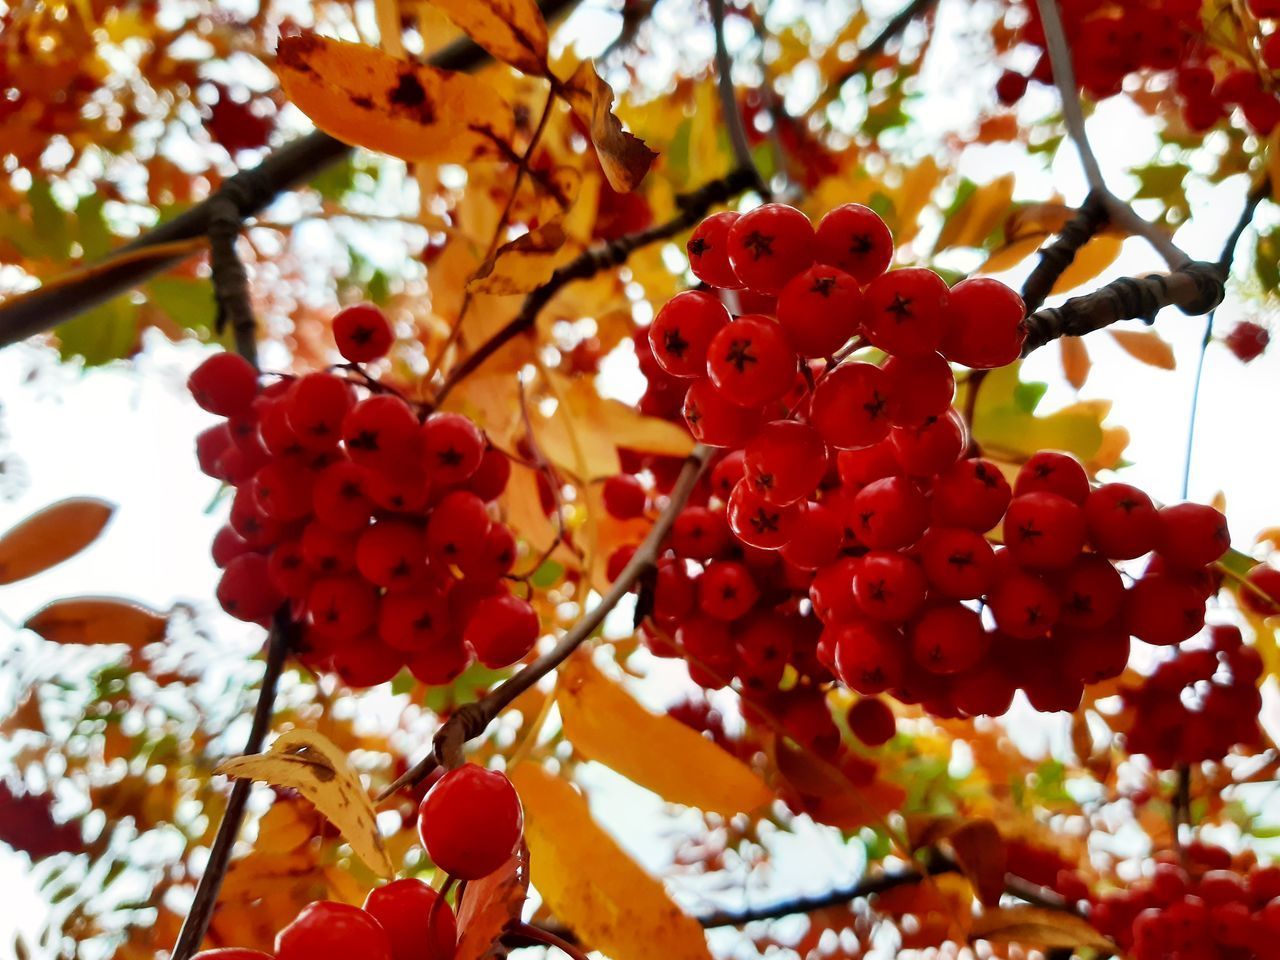 LOW ANGLE VIEW OF CHERRIES ON TREE